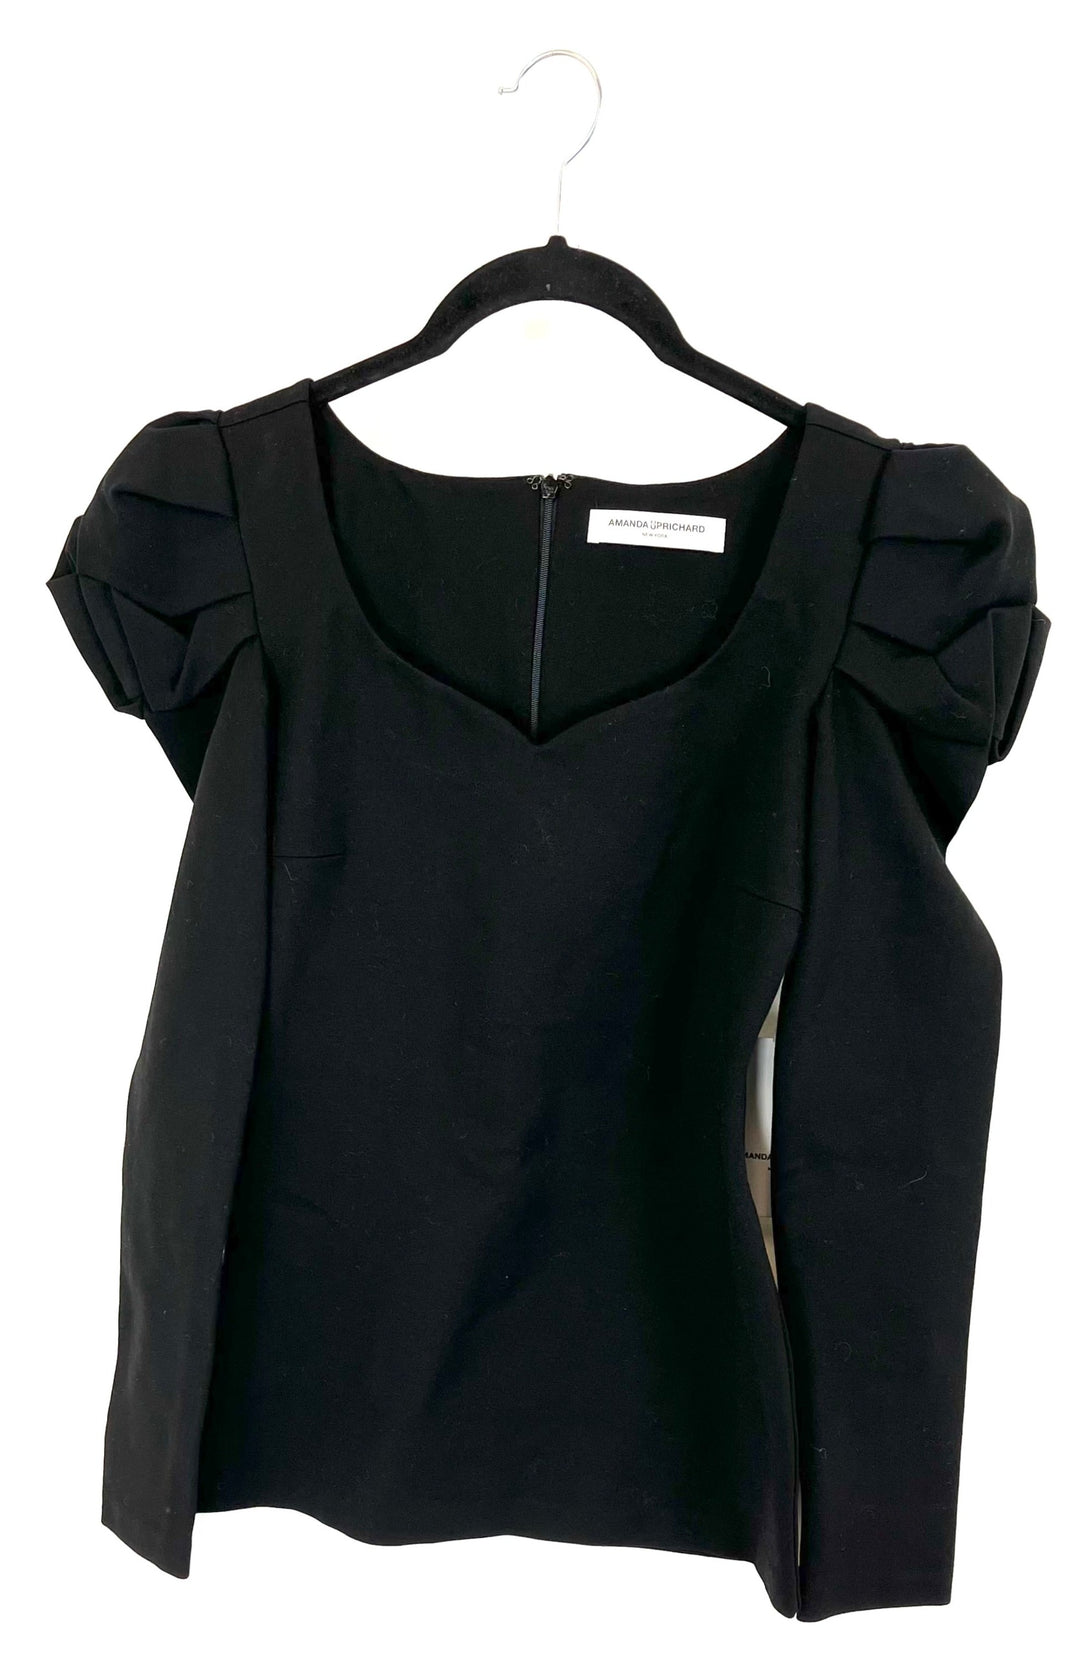 Black Long Sleeve Top - Extra Small